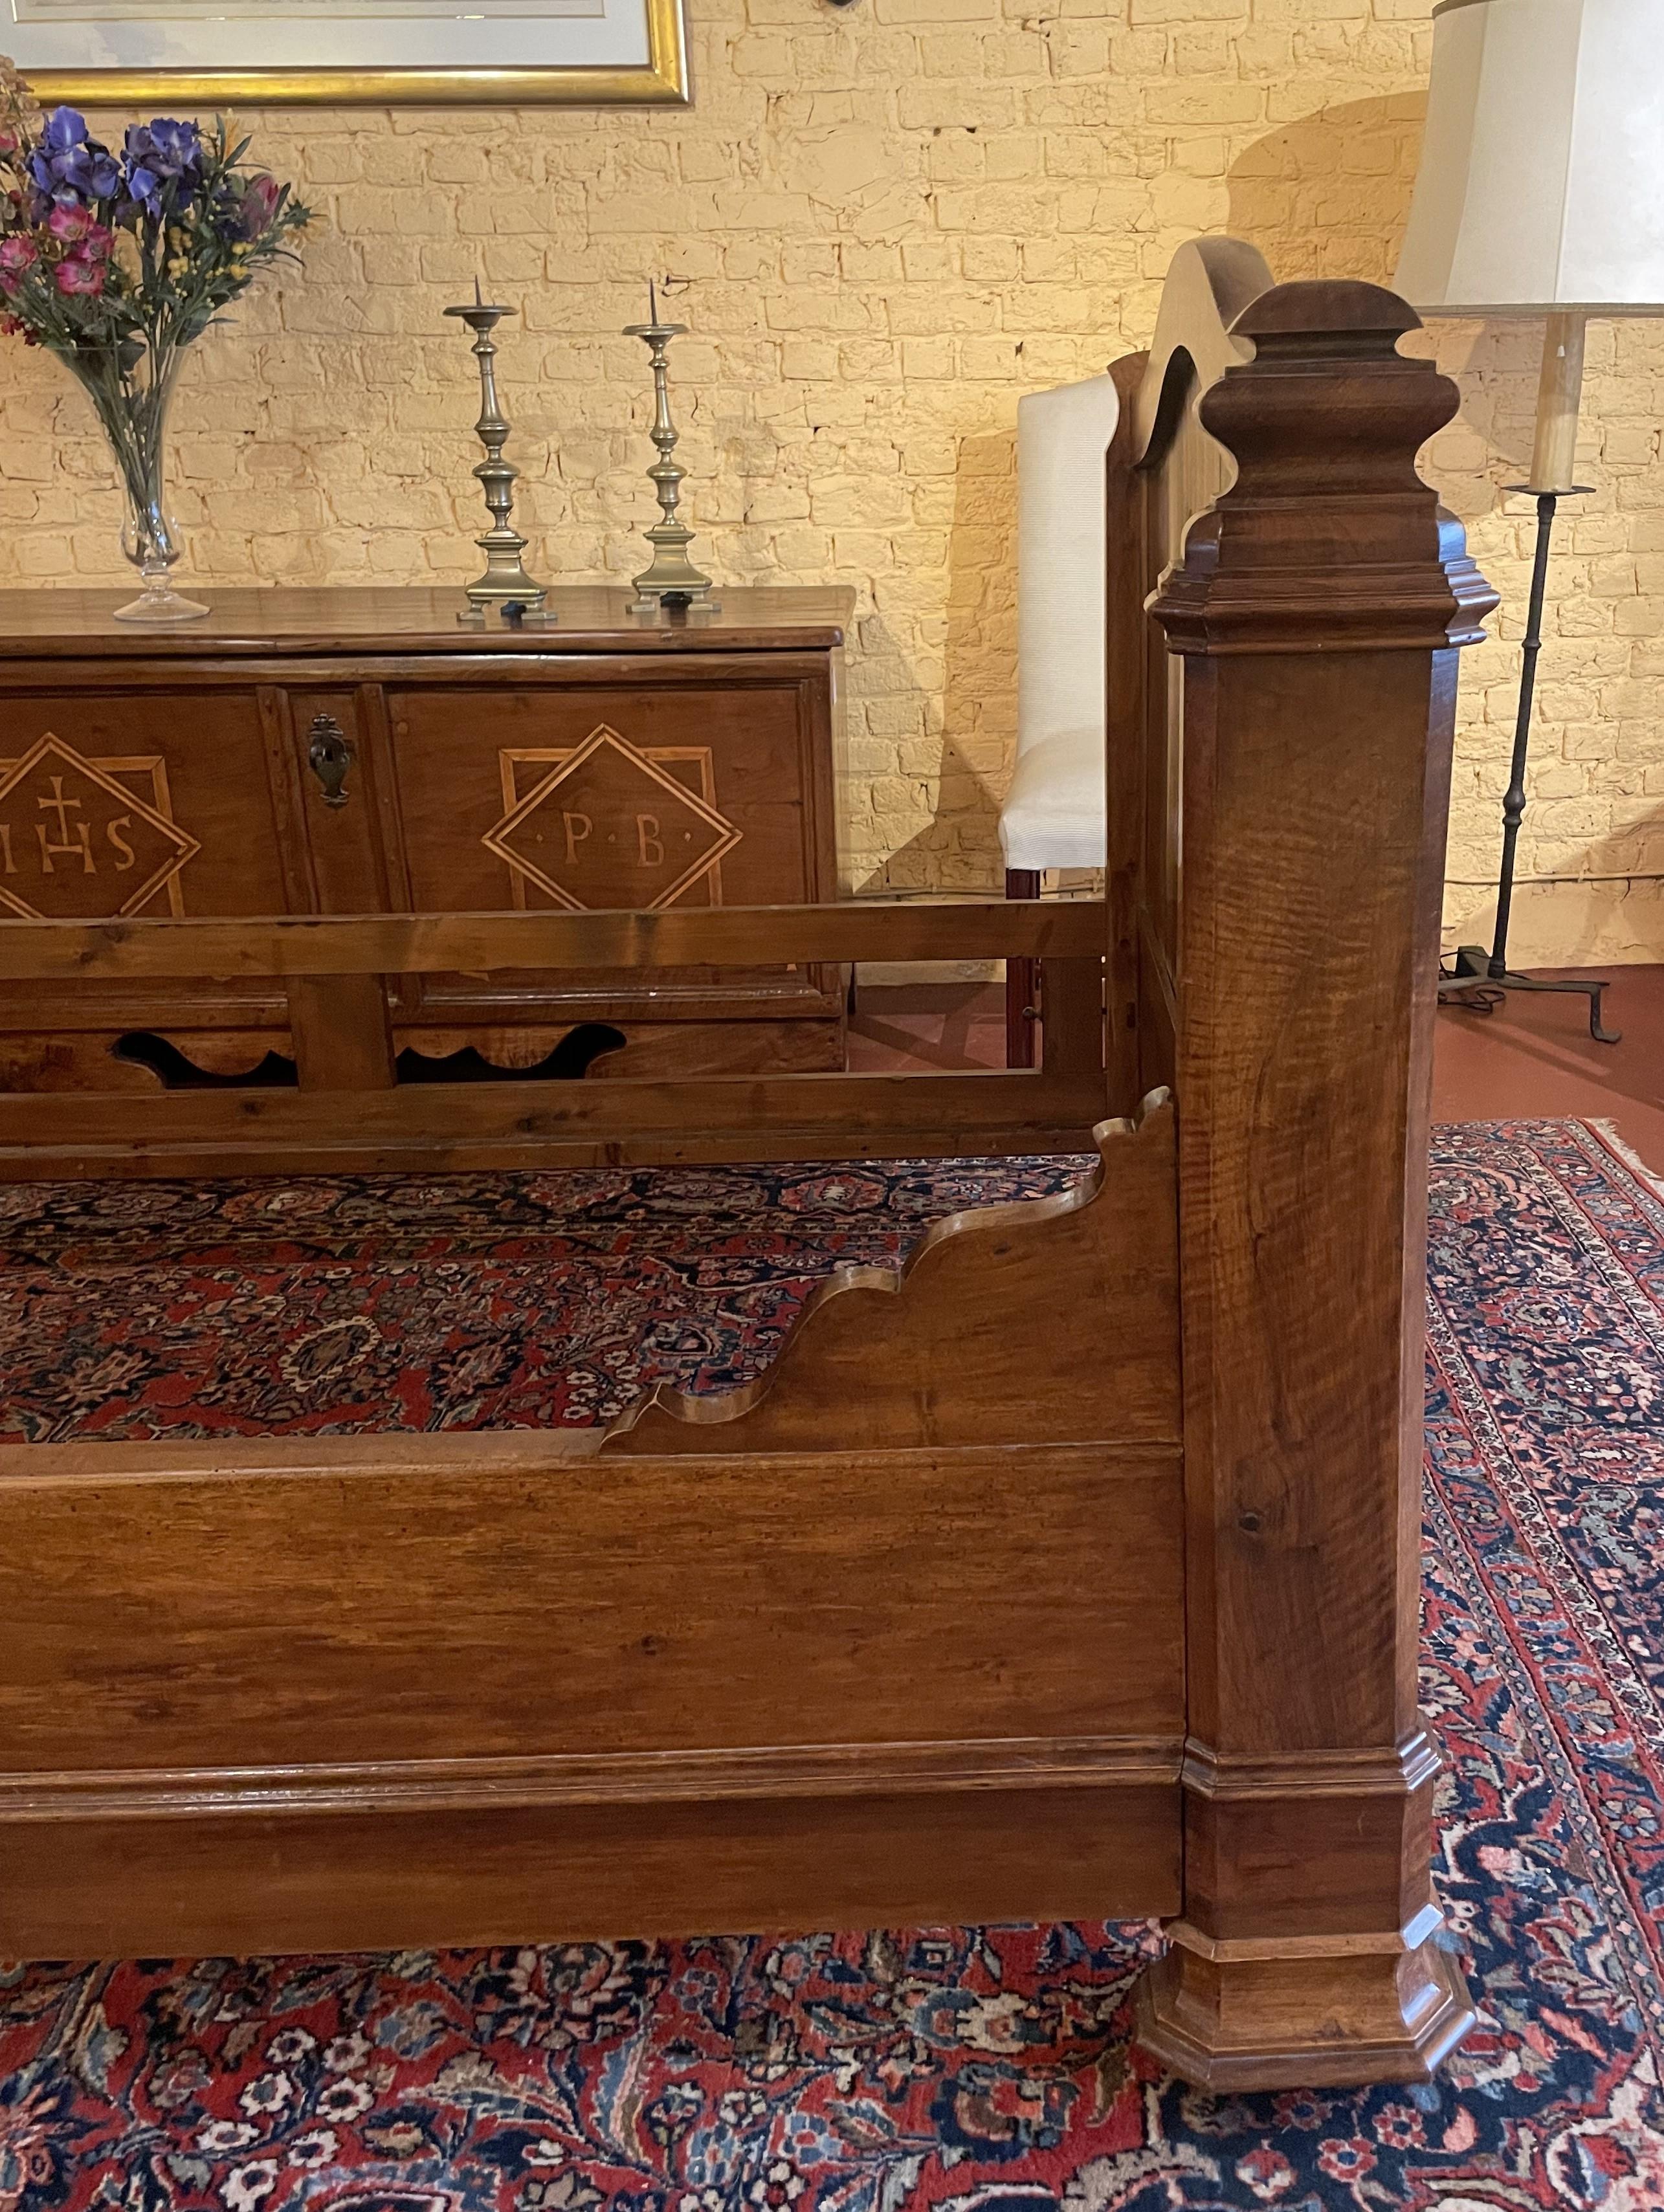 lovely Louis Philippe period walnut bed from the 19th century

Very elegant bed with a beautiful patina and beautiful molding work on its two uprights
. It sits on casters, which allows it to move easily. The casters are positioned so that the bed